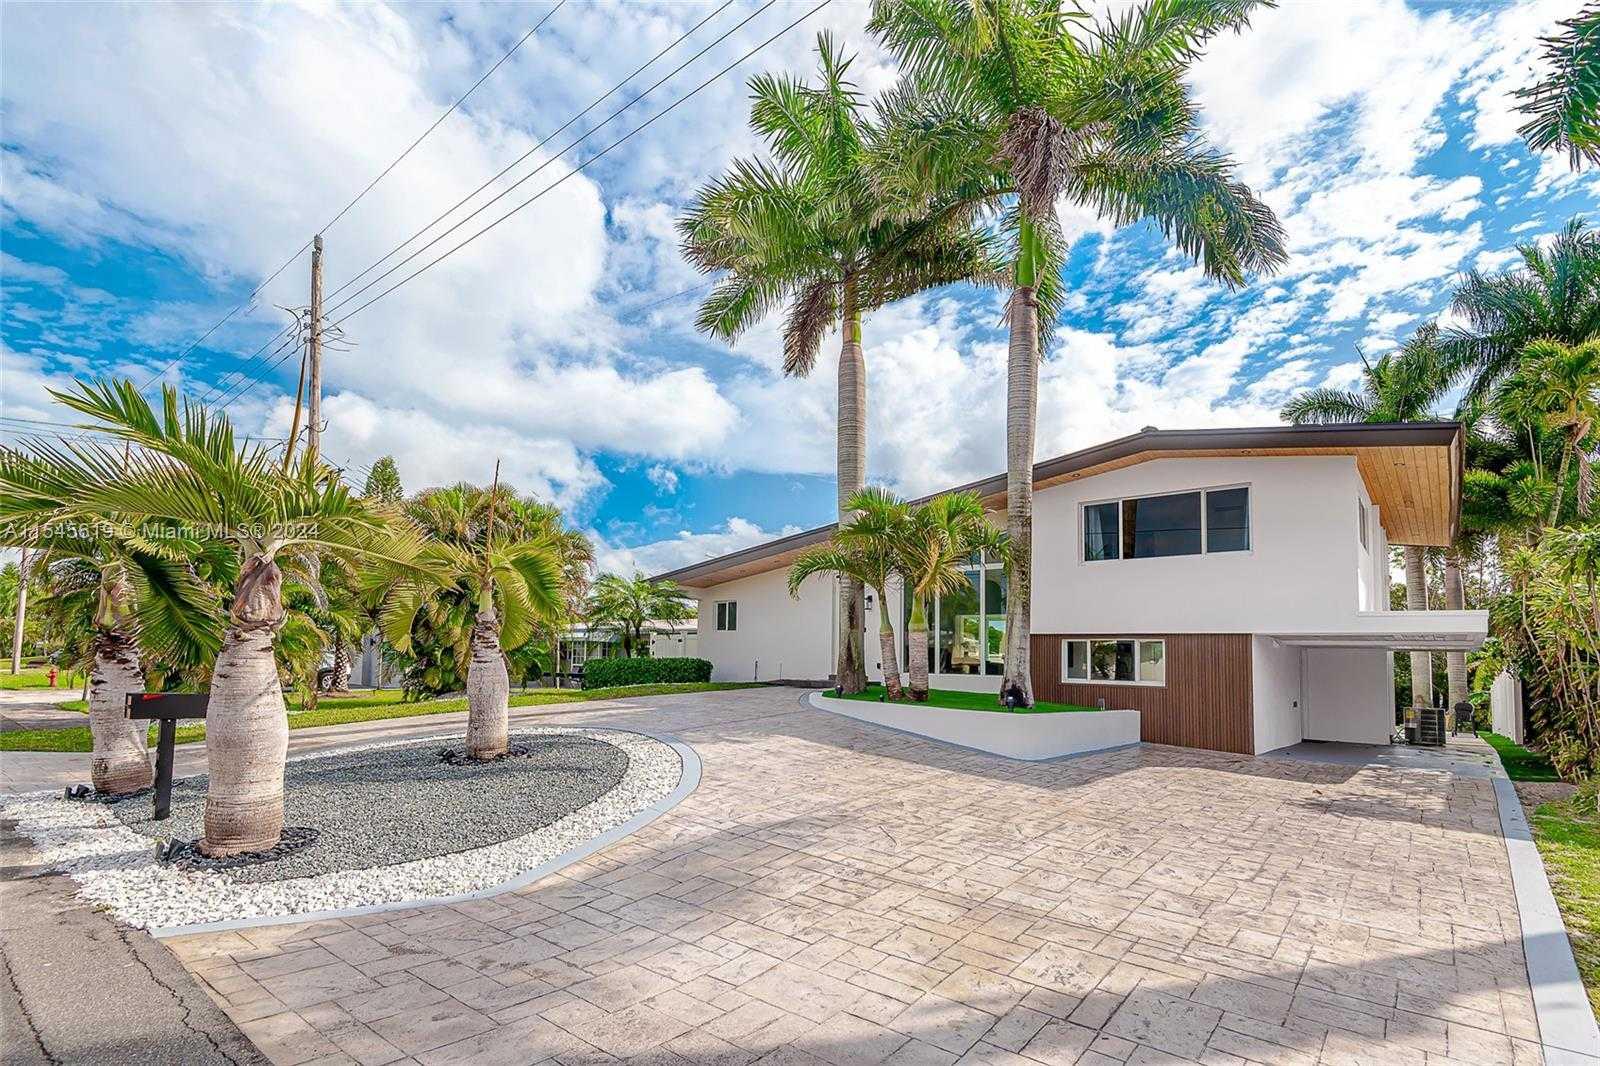 2436 Okeechobee Ln, Fort Lauderdale, Single Family Home,  for sale, Dale Largie, CPA, SFR, LIFESTYLE INTERNATIONAL REALTY